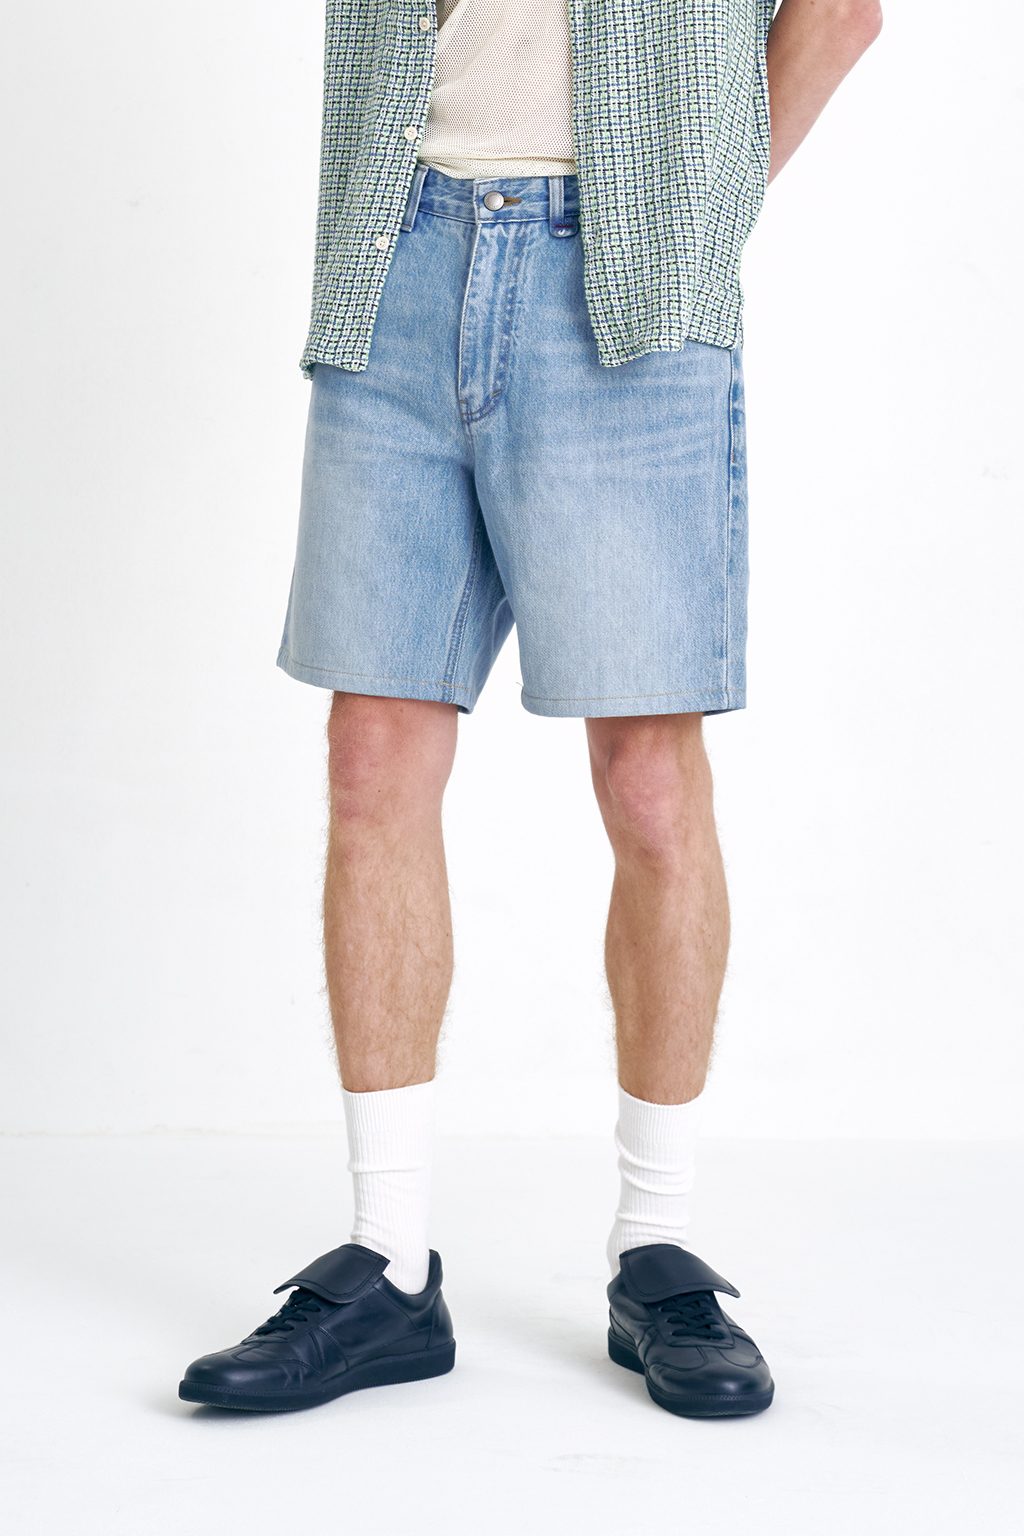 Blue Cone Short Jeans